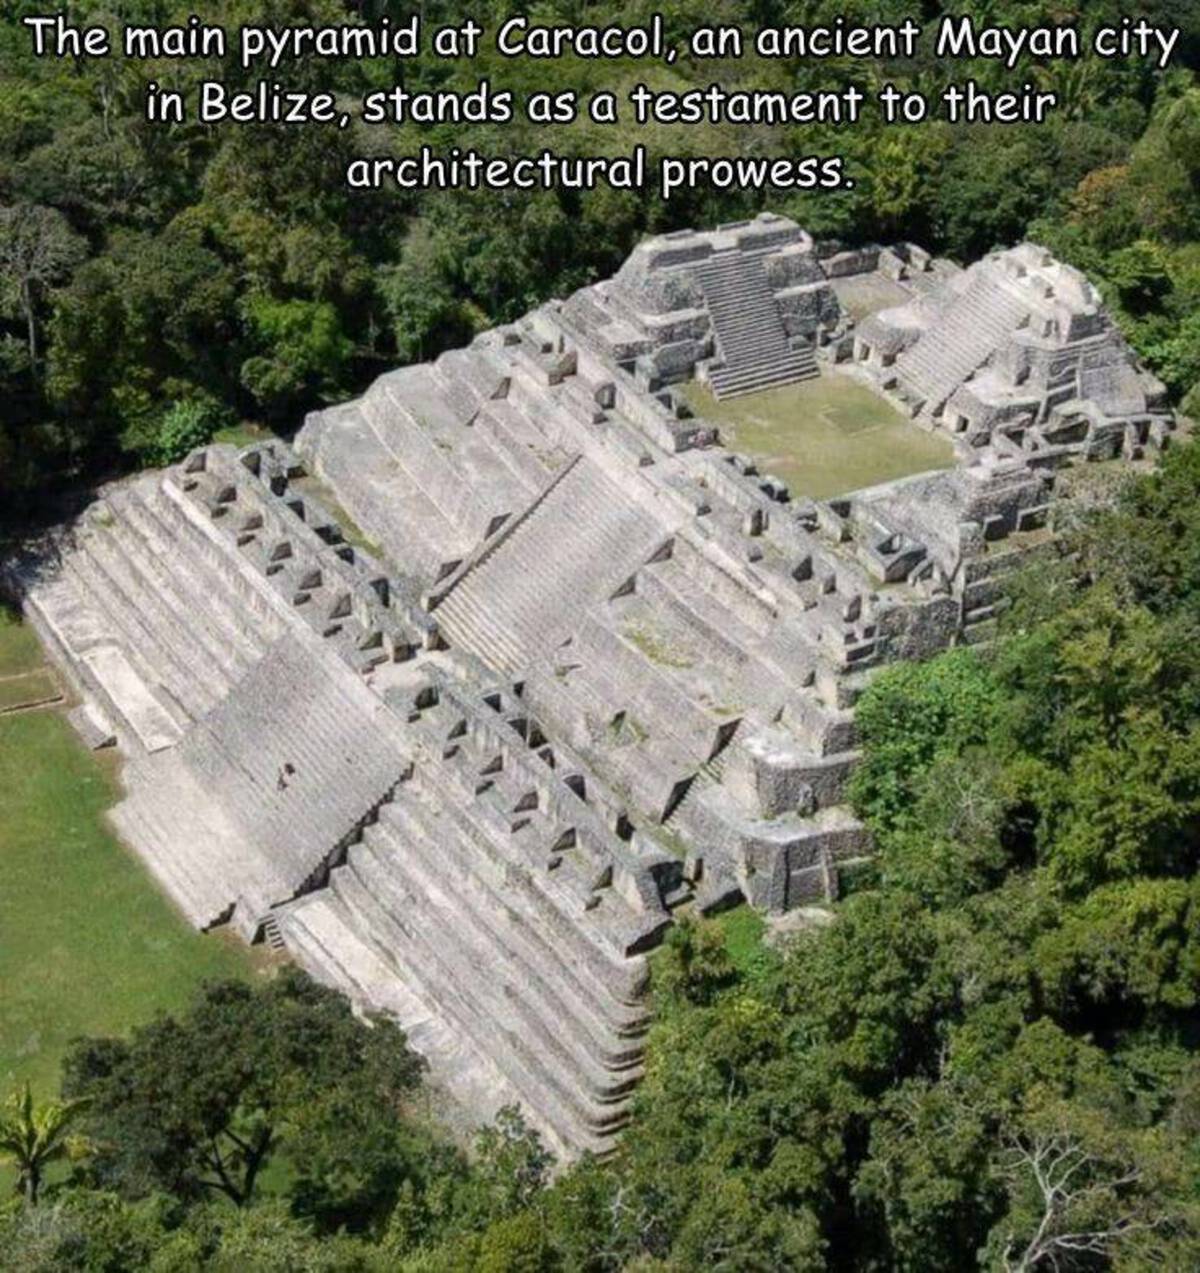 caracol sky palace - The main pyramid at Caracol, an ancient Mayan city in Belize, stands as a testament to their architectural prowess.